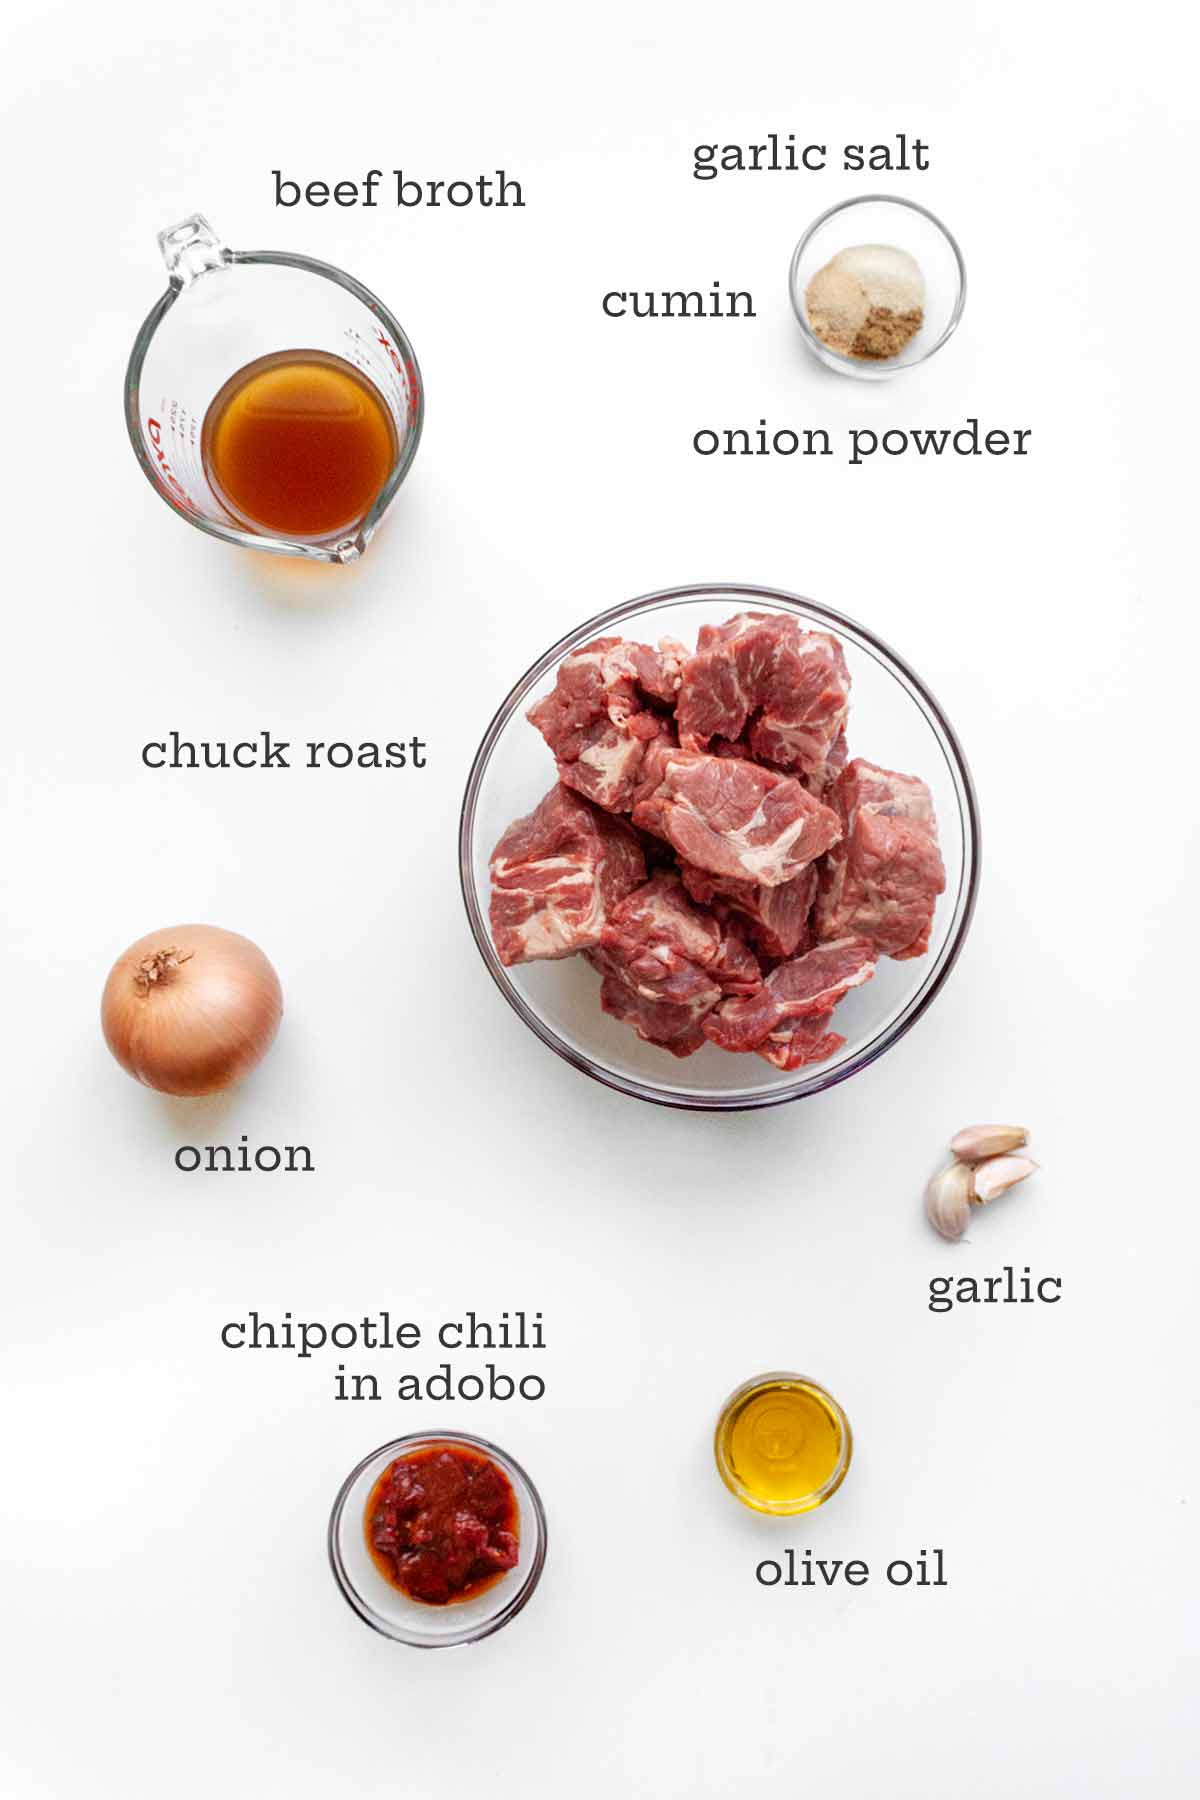 The ingredients for Instant Pot chuck roast--beef, broth, spices, onion, chipotle, oil, and garlic.